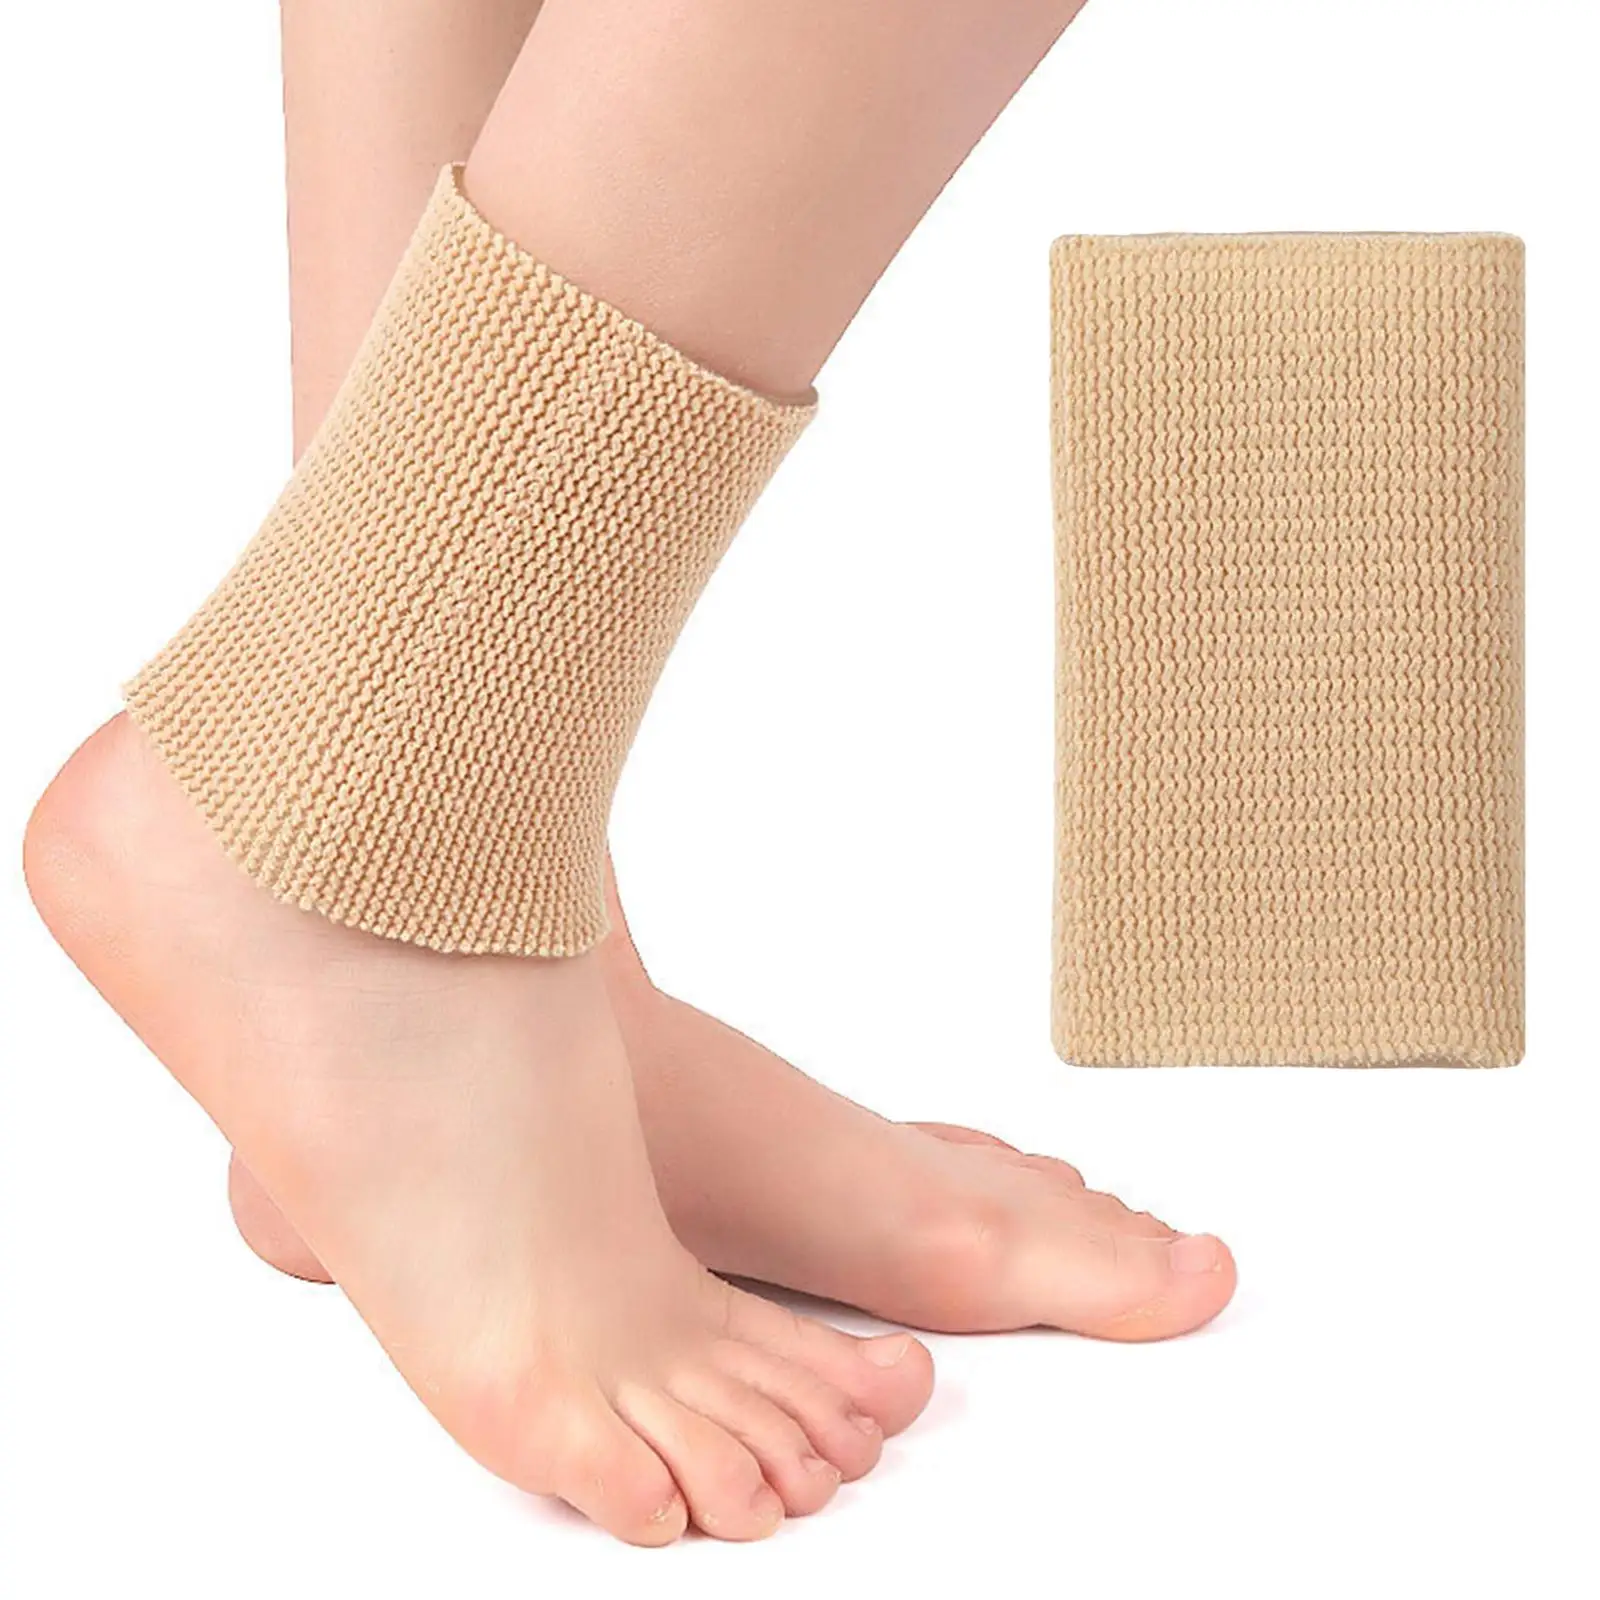 Ankles Brace Sleeve Elastic Protection Fasciitis Comfortable Nylon Ankle Support